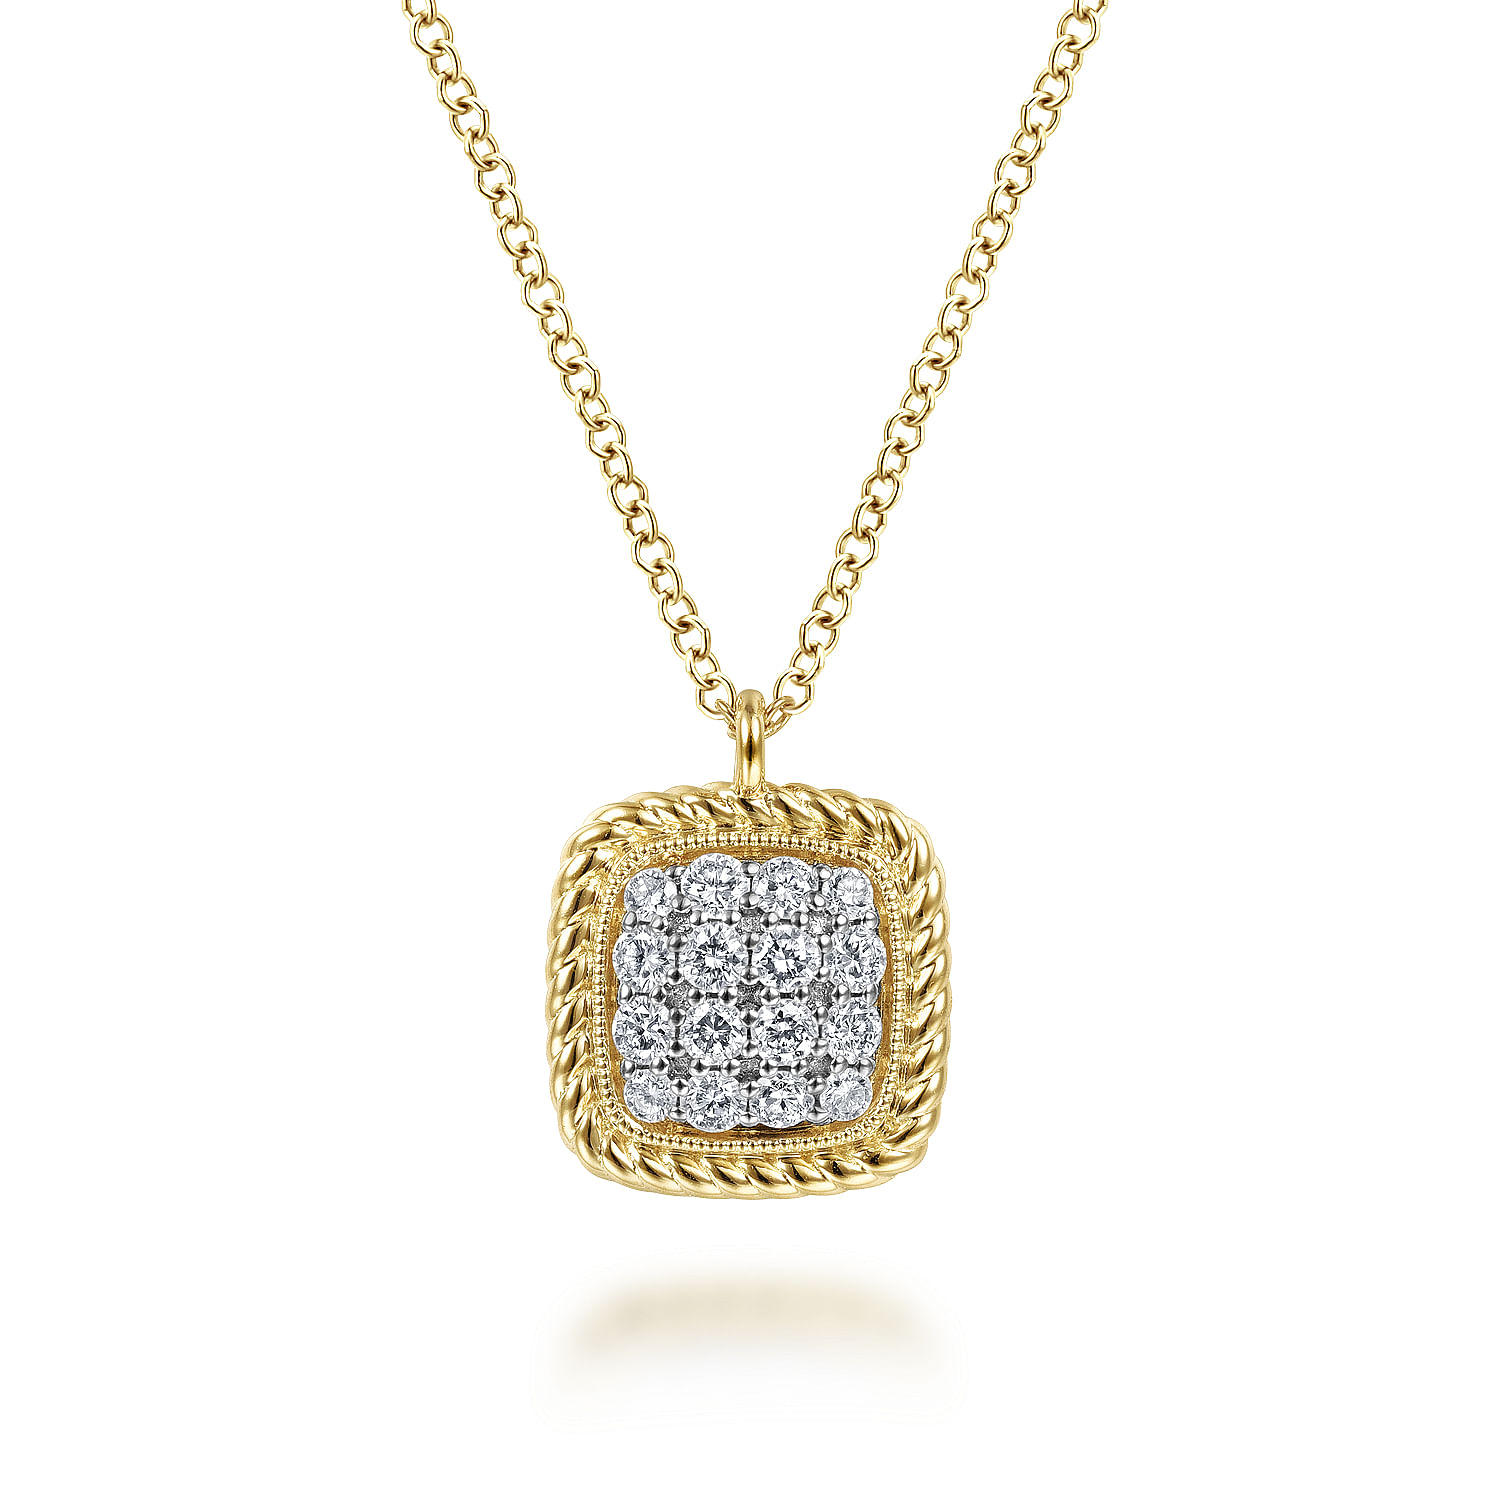 Square 14K Yellow Gold Pave Diamond Pendant Necklace with Twisted Rope Frame